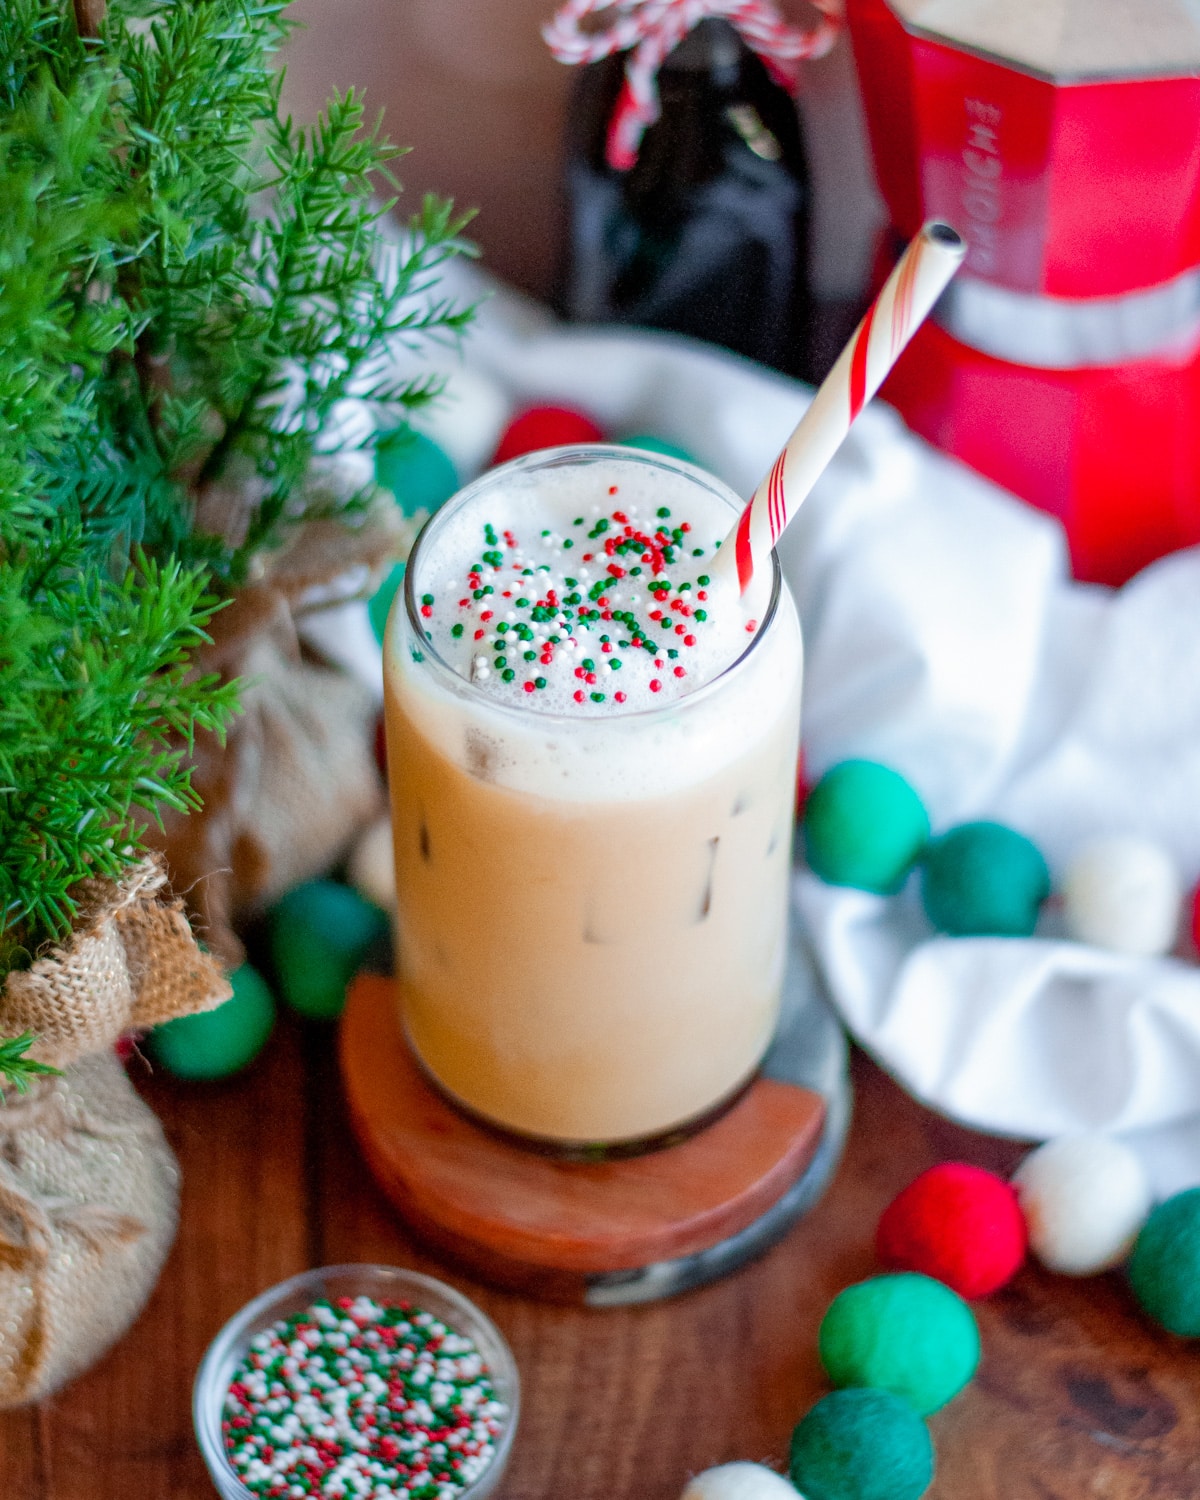 an iced sugar cookie latte with a red and white striped straw, and topped with red white and green sprinkles. The glass is surrounded by holiday felt-ball garland, containers of sprinkles, a jar of sugar cookie simple syrup with a bow, a red moka pot, a white linen, and greenery.